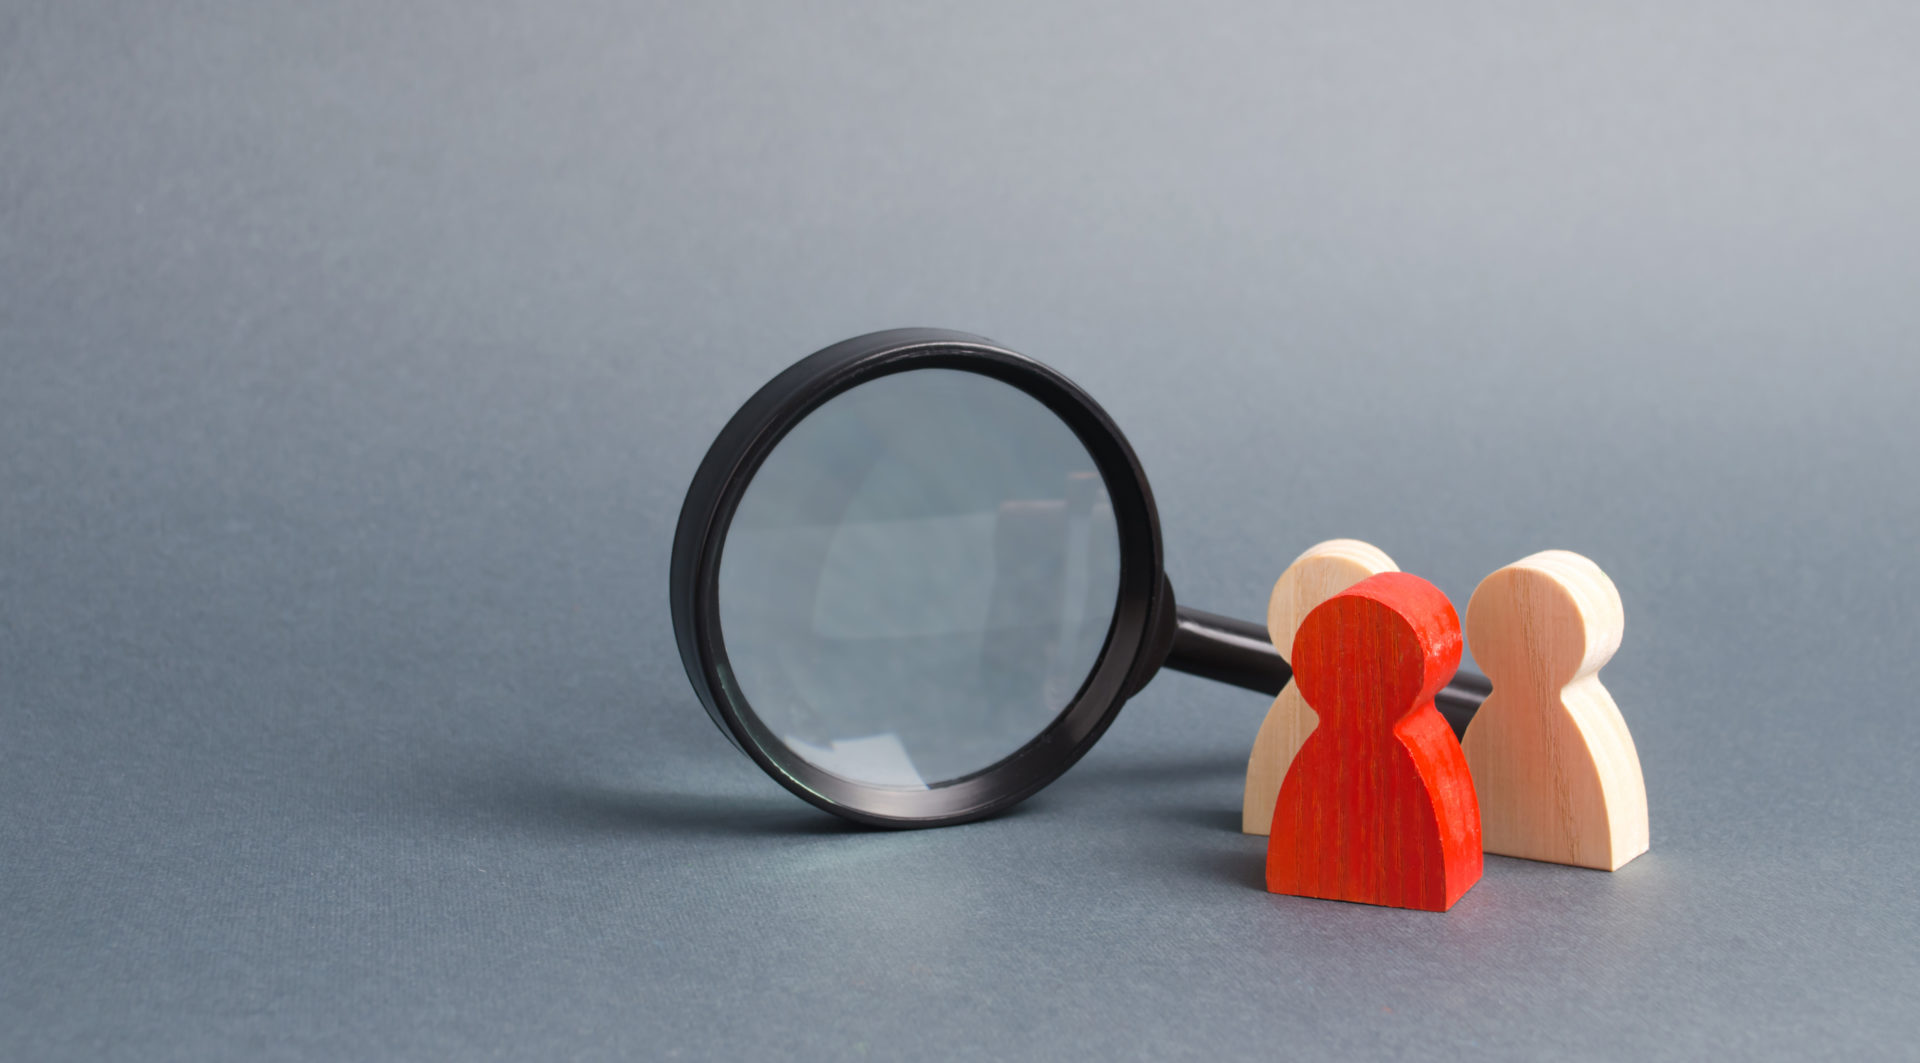 Wooden characters next to a magnifying glass